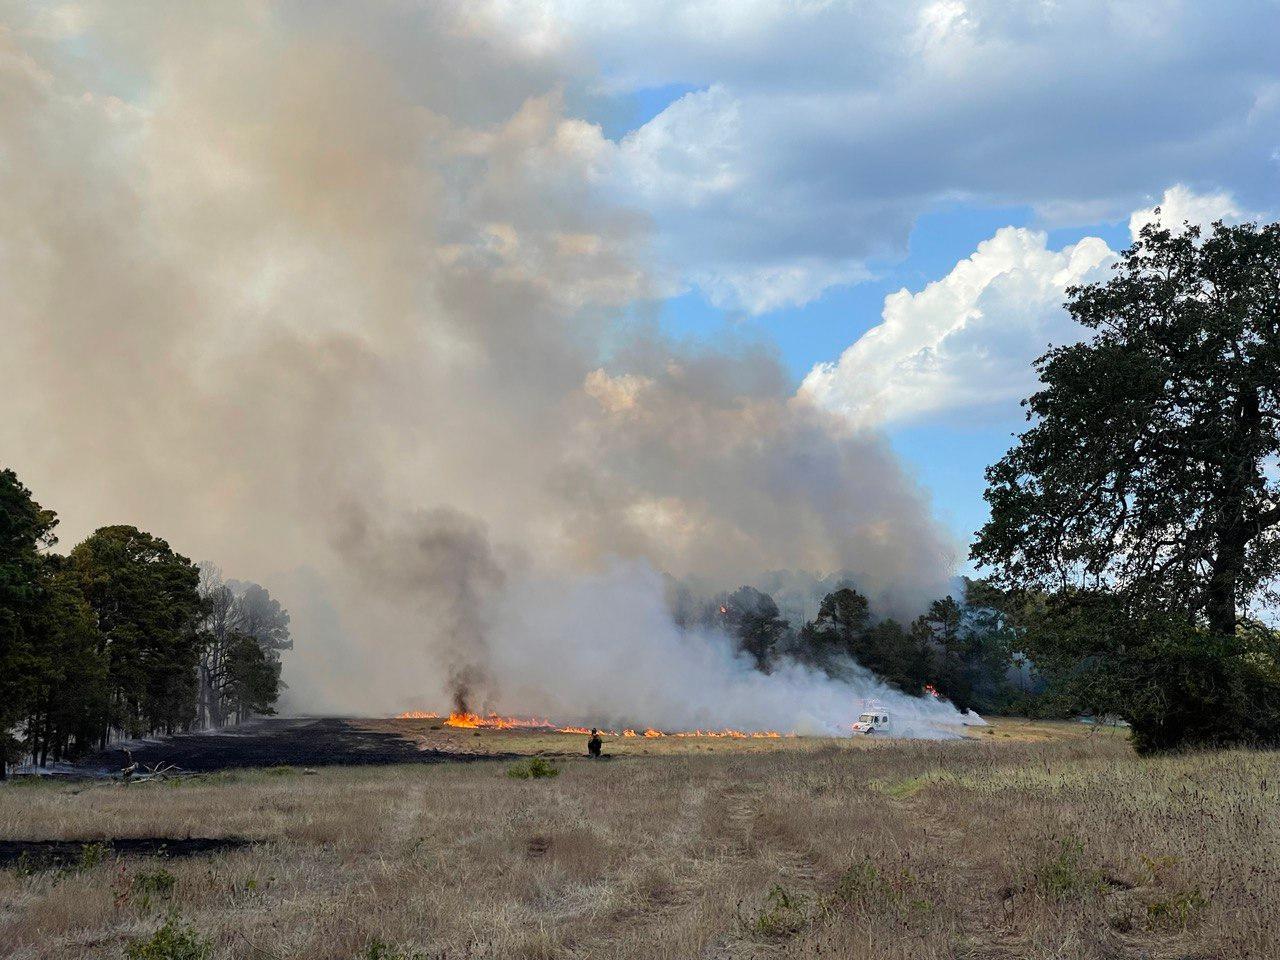 White and grey smoke rises from the ground and up through the trees against a cloudy, blue sky.  Dry grass covers the foreground. Single firefighter stand at fire's edge as flames rise up from the ground. 2 Engines are parked at the edge of the smoke.